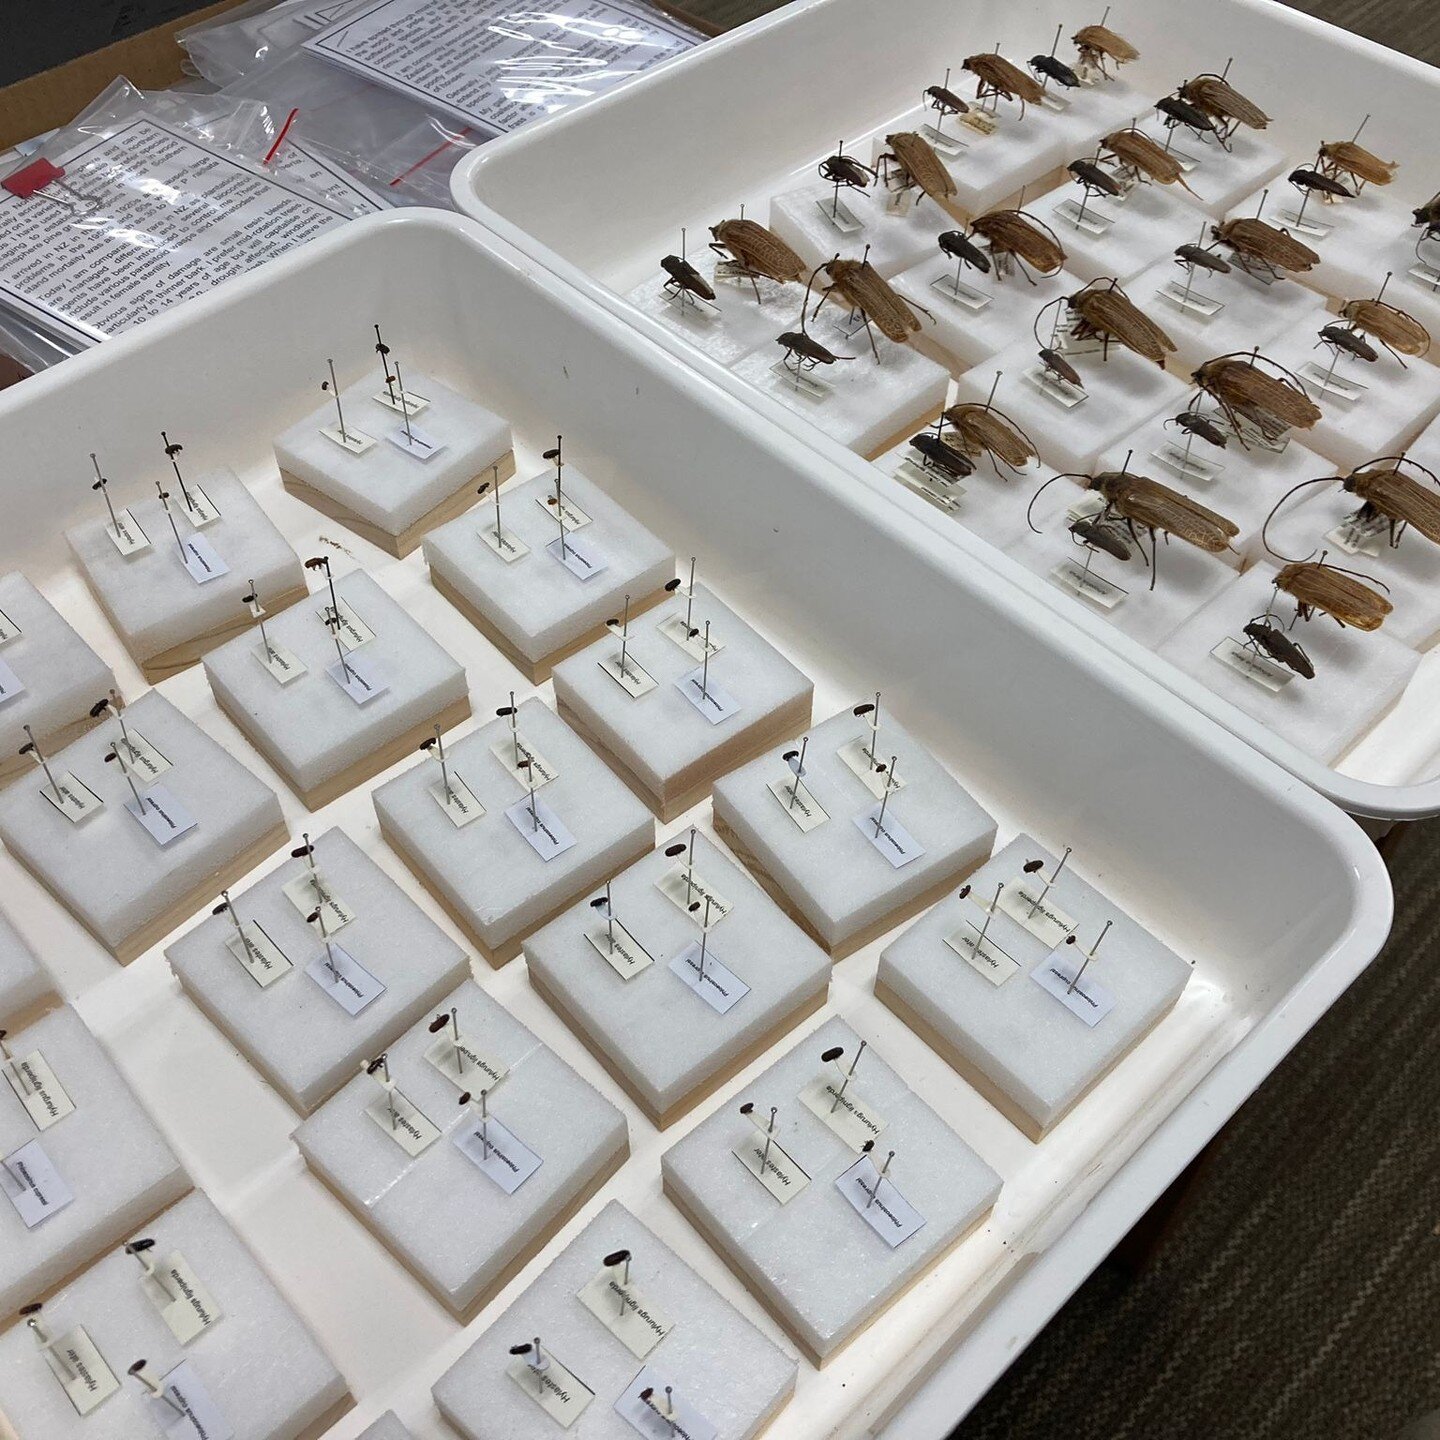 A little peek behind the curtain into my day job...

It's been great fun teaching applied entomology to our forestry students this month. Here's some teaching specimen examples of forest insect pests and saprotrophs present in New Zealand. 

We're al